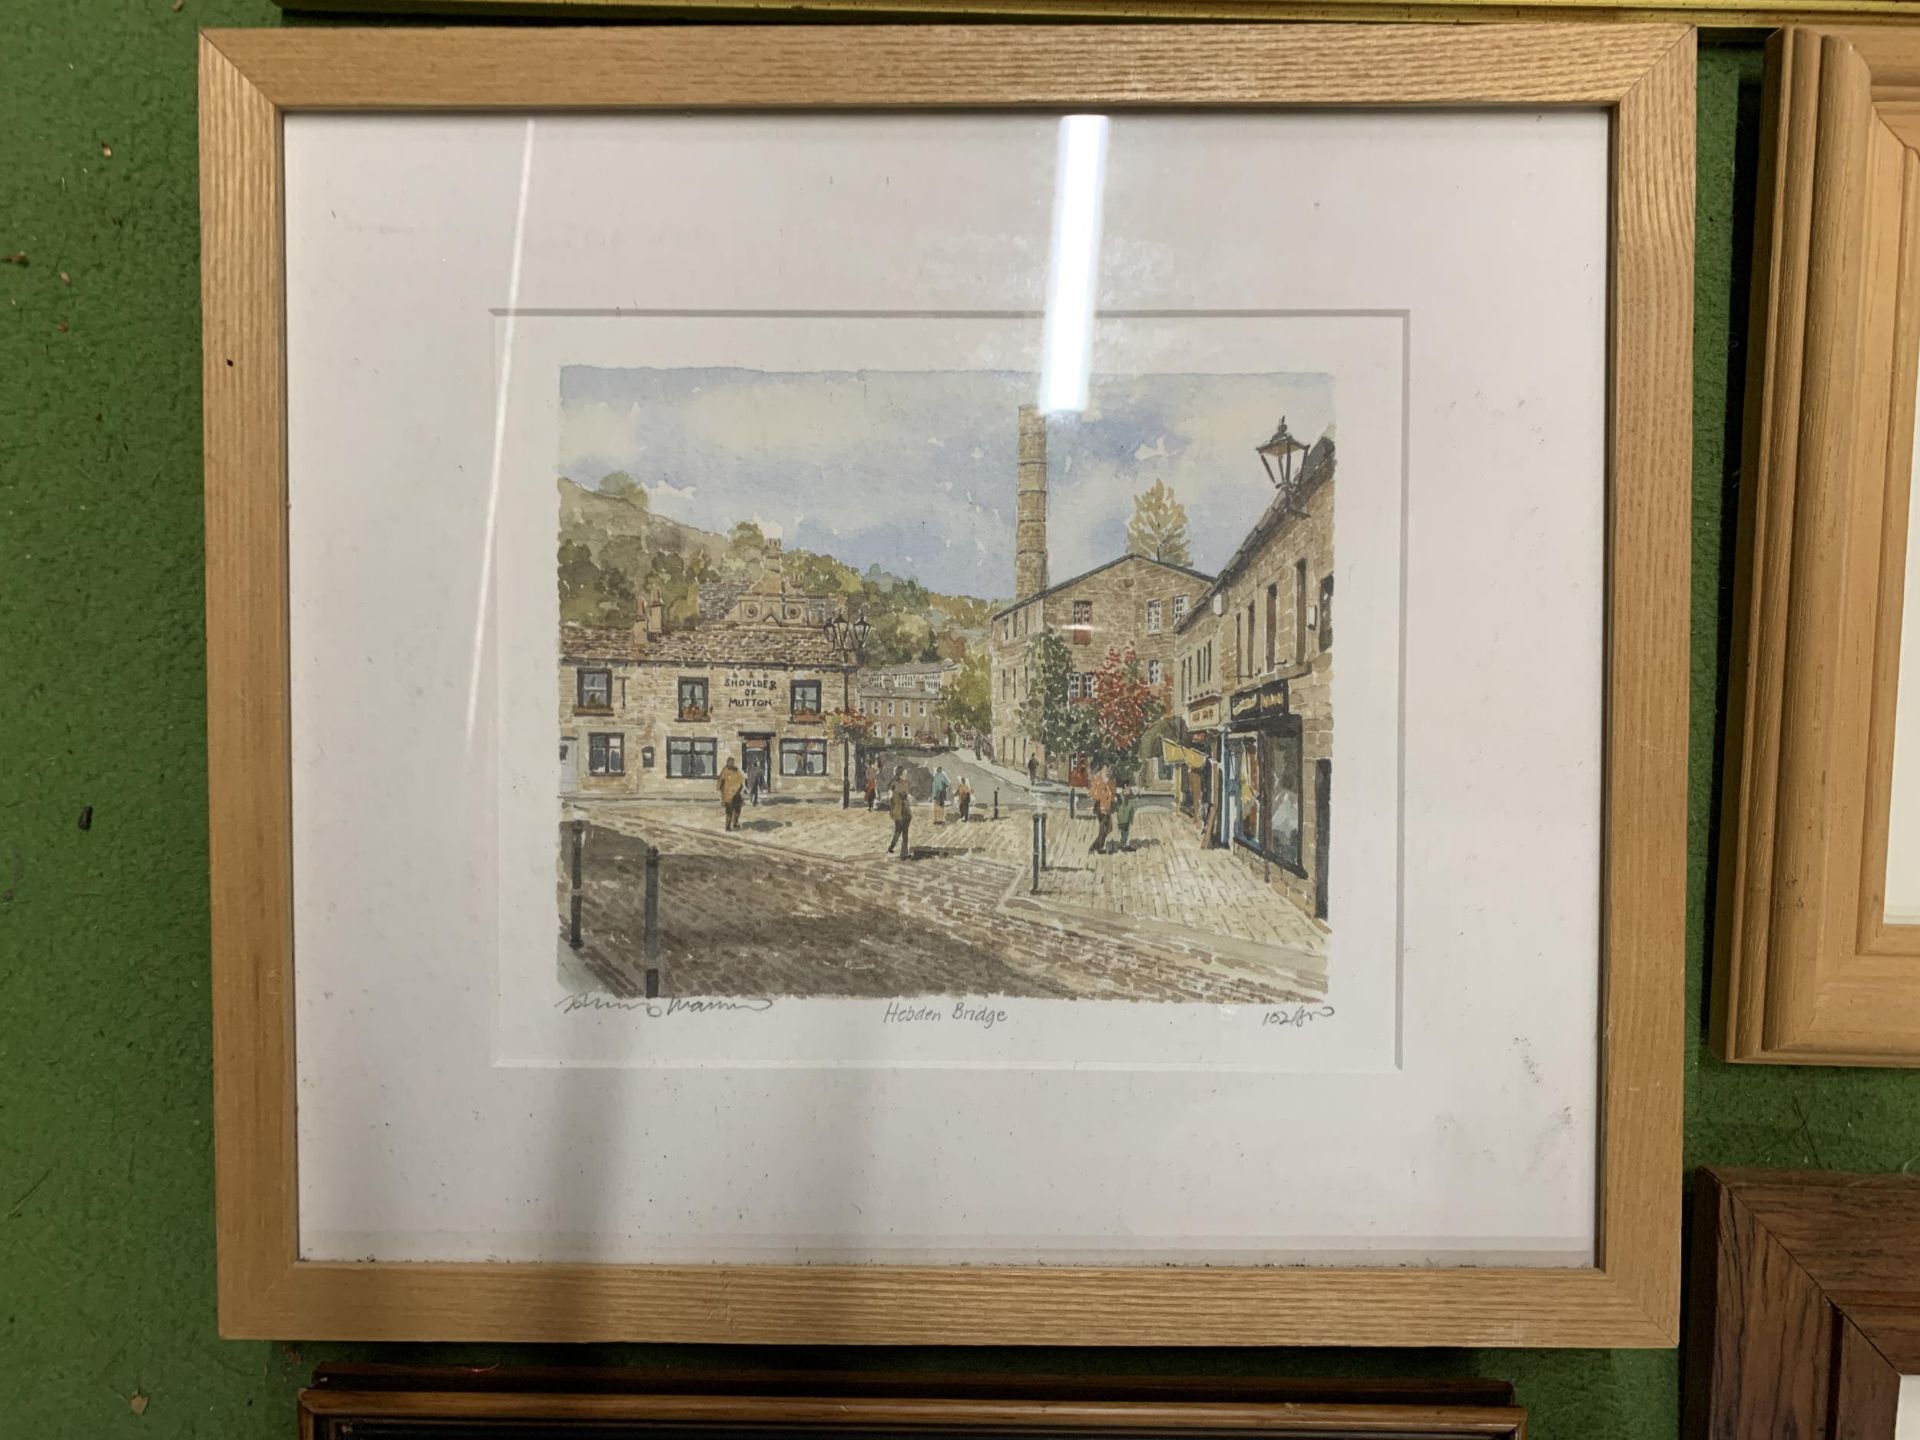 SIX FRAMED WATERCOLOURS AND PRINTS TO INCLUDE HEBDEN BRIDGE, BOATS, COUNTRY SCENES, ETC - Image 4 of 7